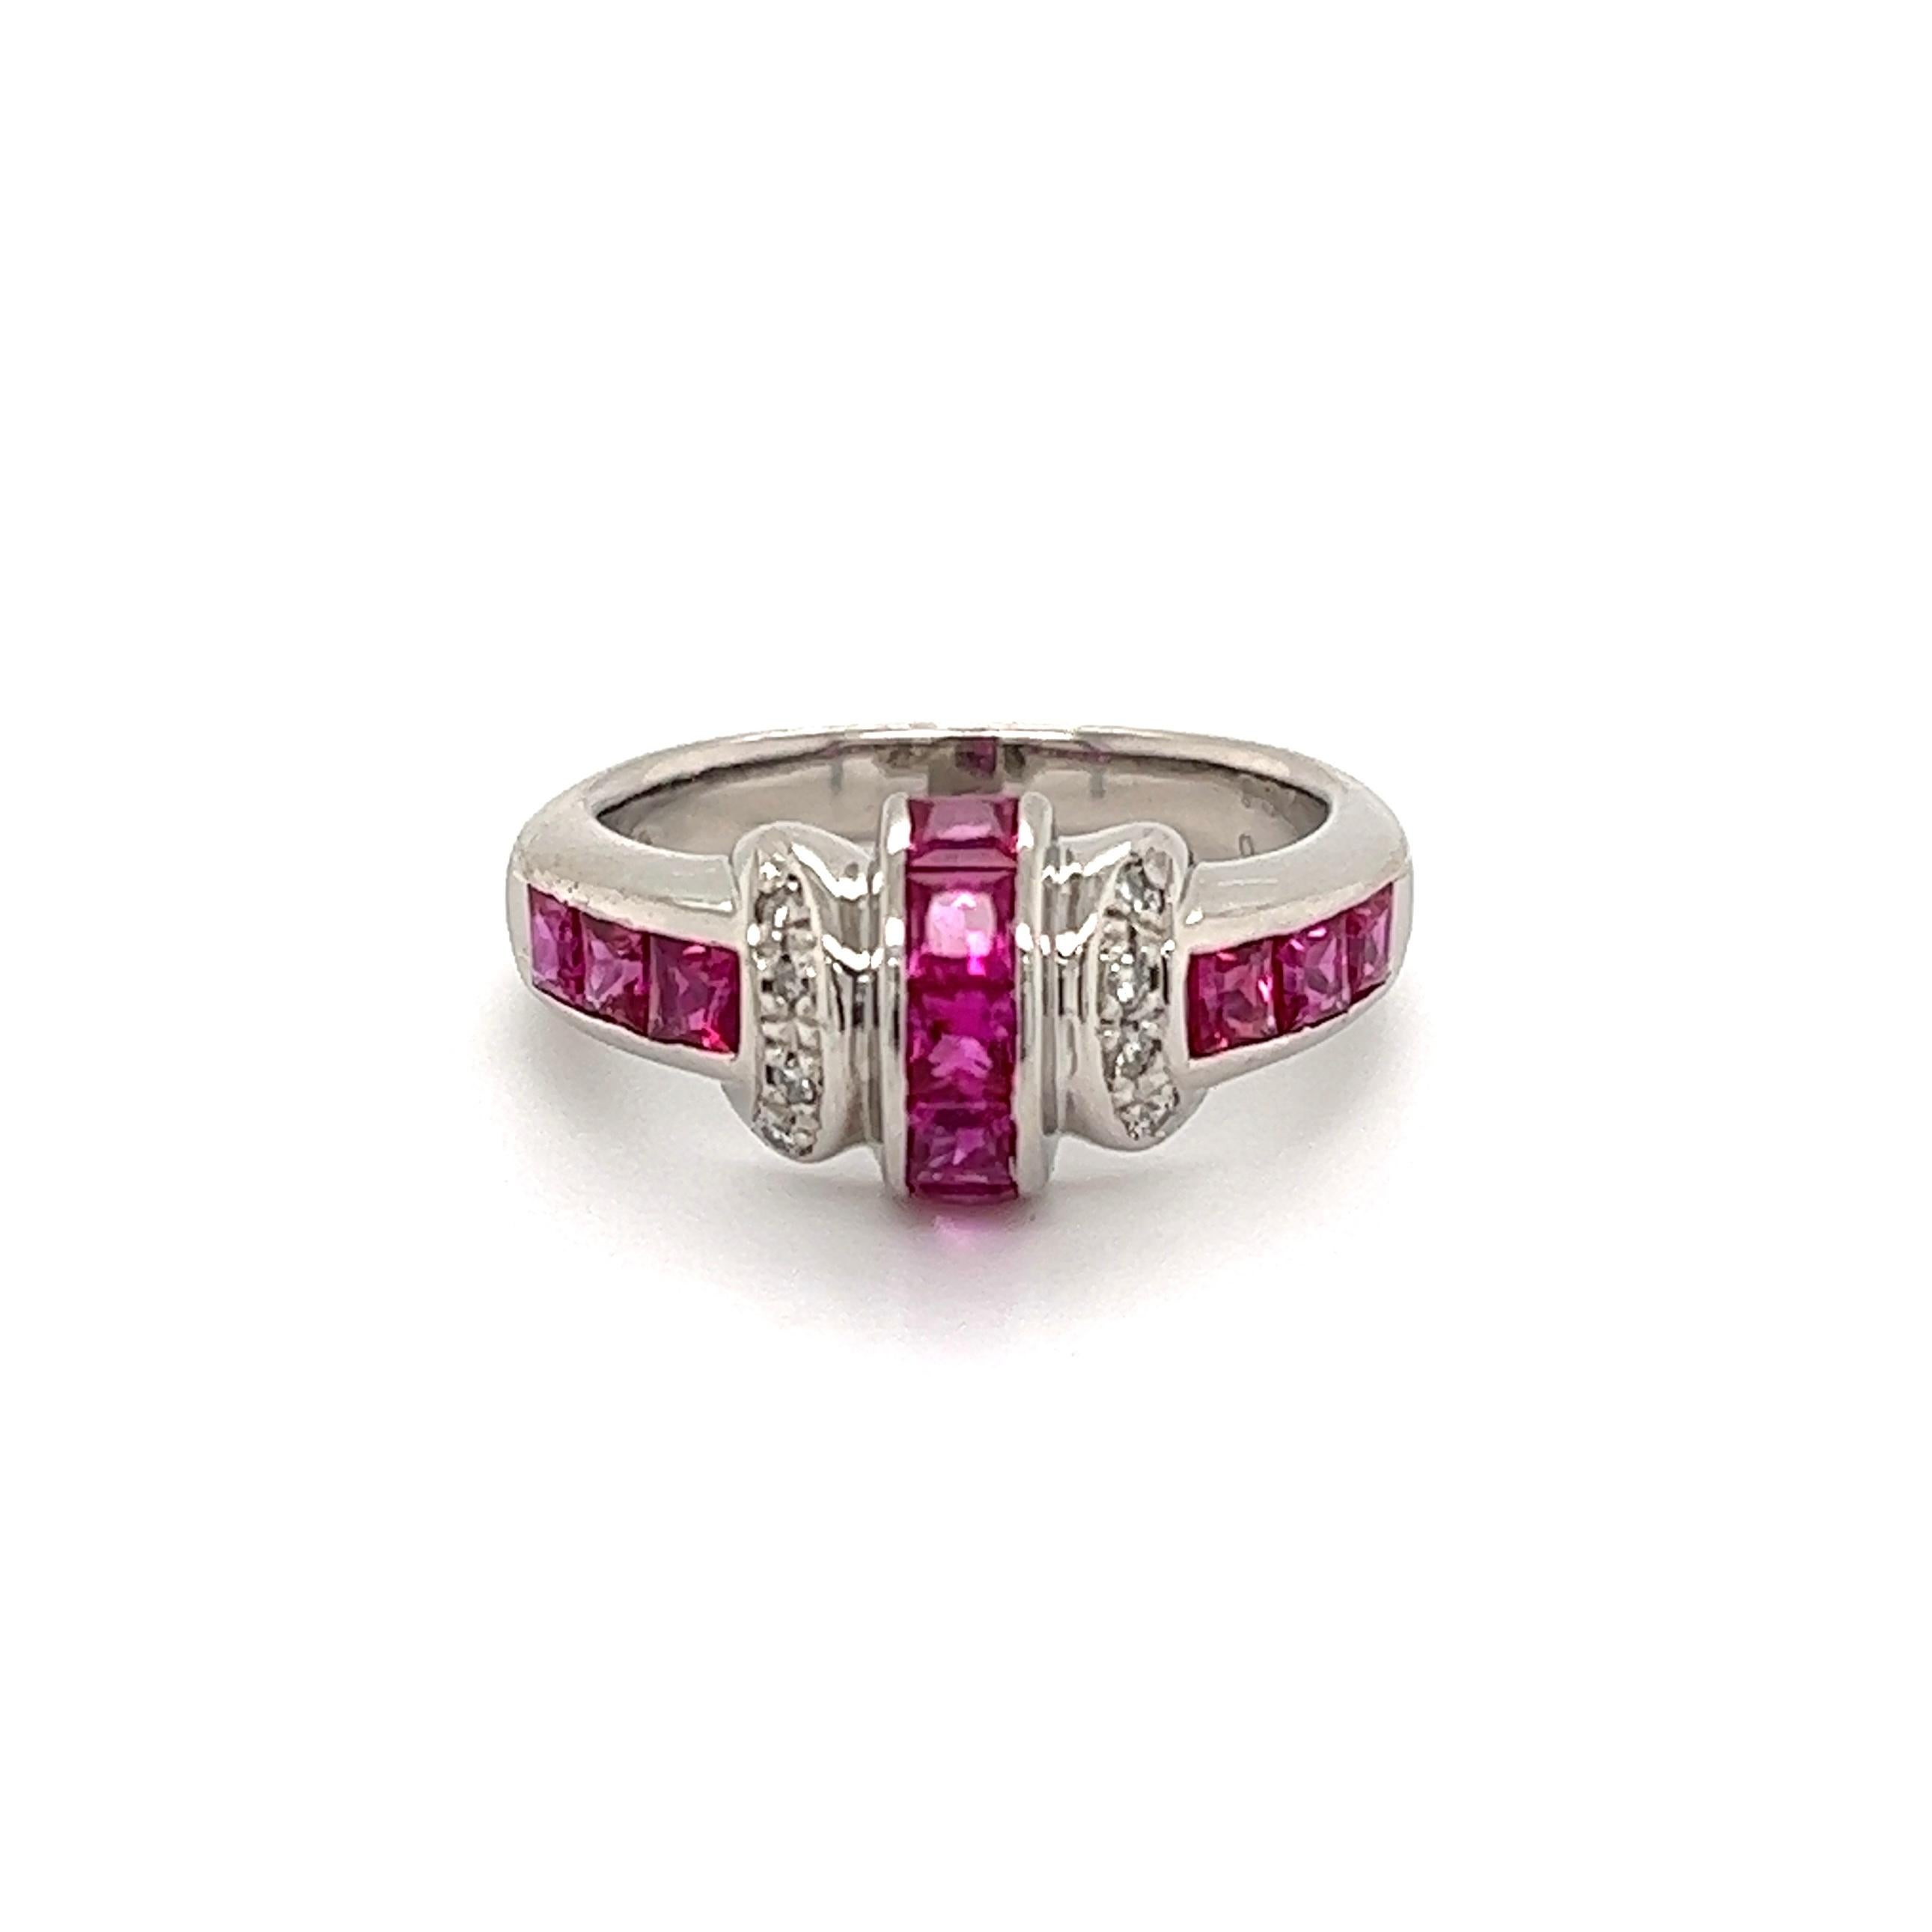 Simply Beautiful! Diamond and Ruby Platinum Cocktail Band Ring. Securely Hand set with Rubies weighing approx. 1.34tcw and Diamonds approx. 0.08tcw. Hand crafted Platinum mounting. Measuring approx. 0.91” l x 0.85” w x 0.37” h. Ring size 6.5, we